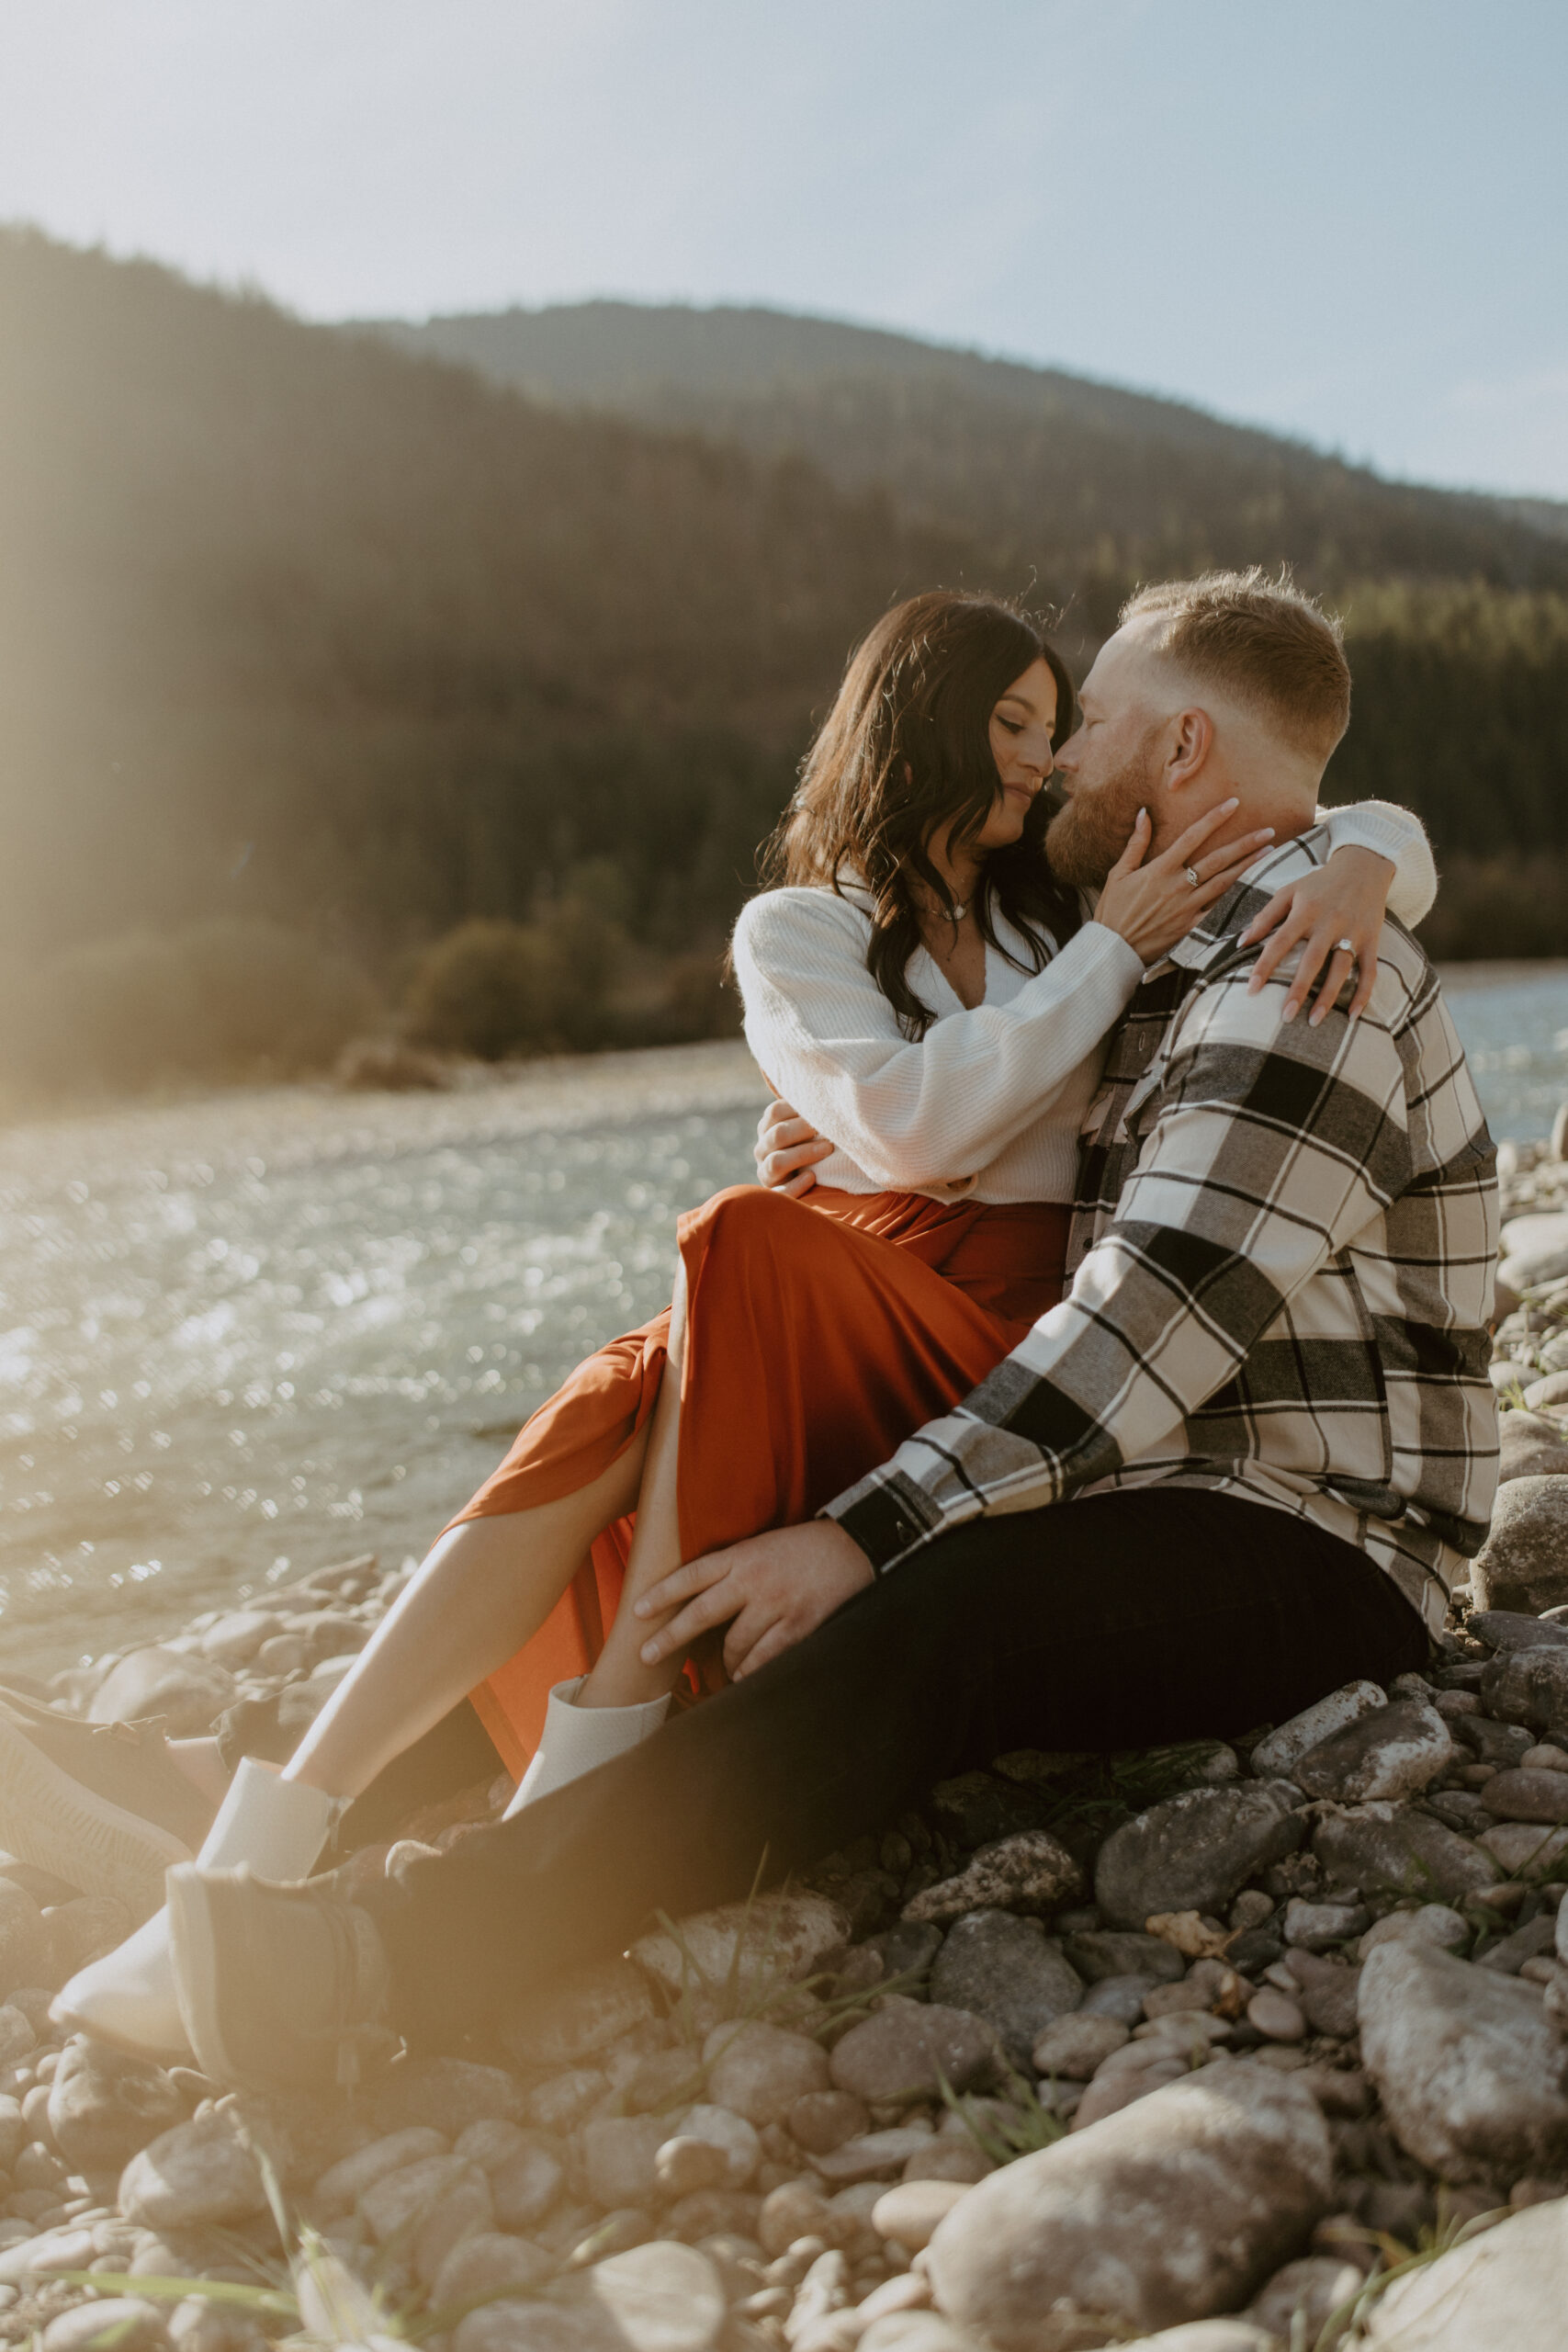 searching for the best engagement photo idea and location, get sentimental!